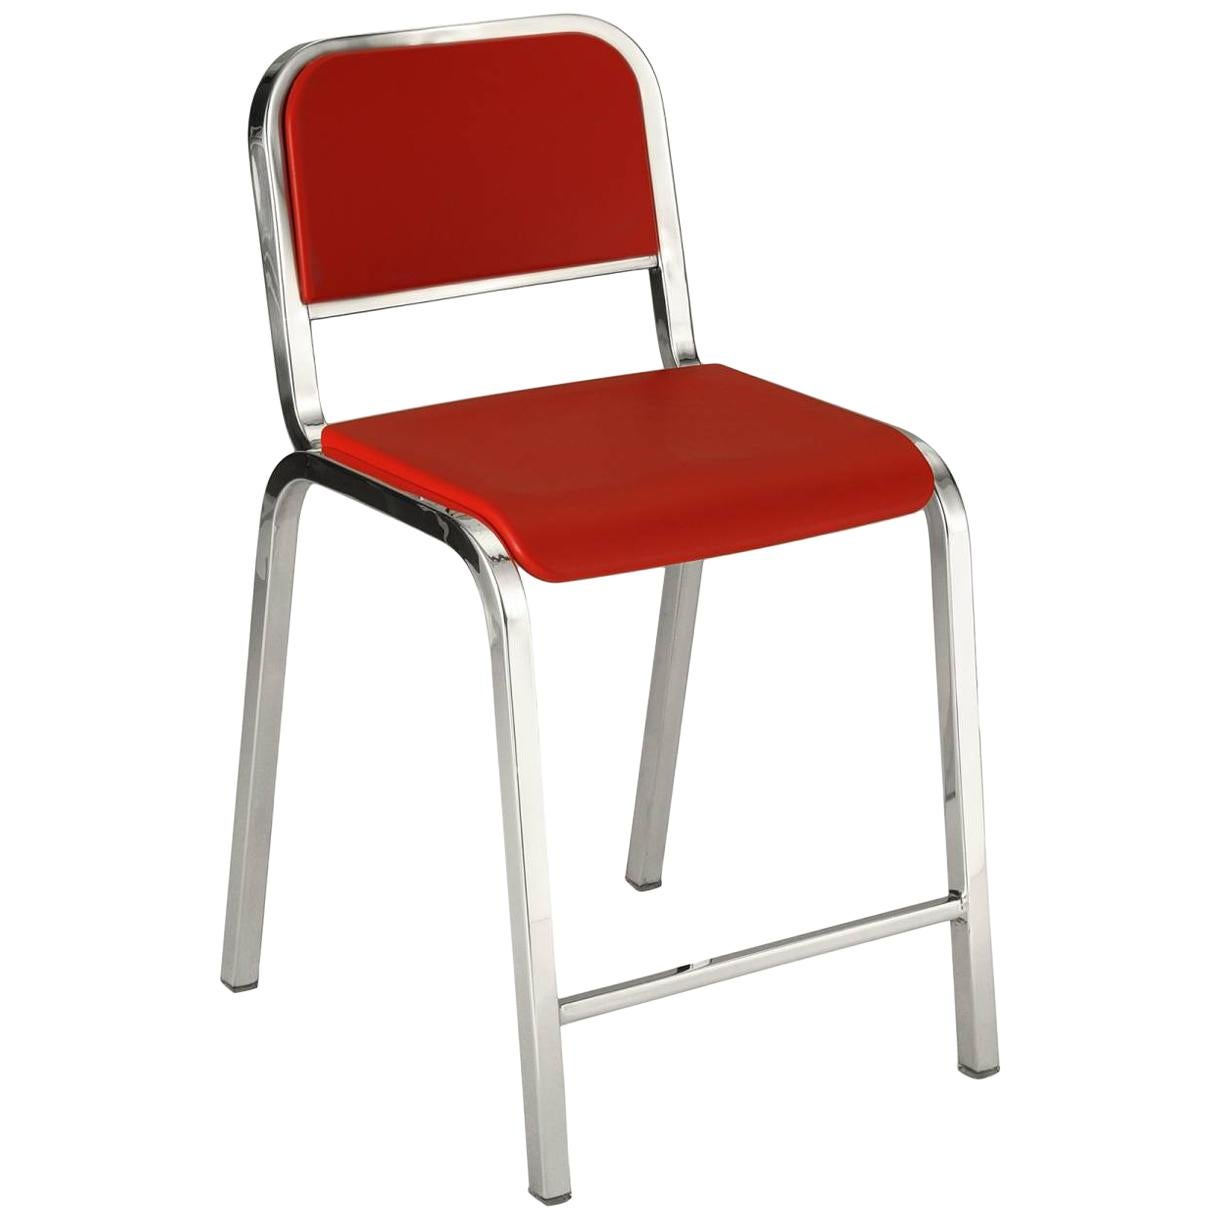 Emeco Nine-0 Counter Stool in Polished Aluminum and Red by Ettore Sottsass